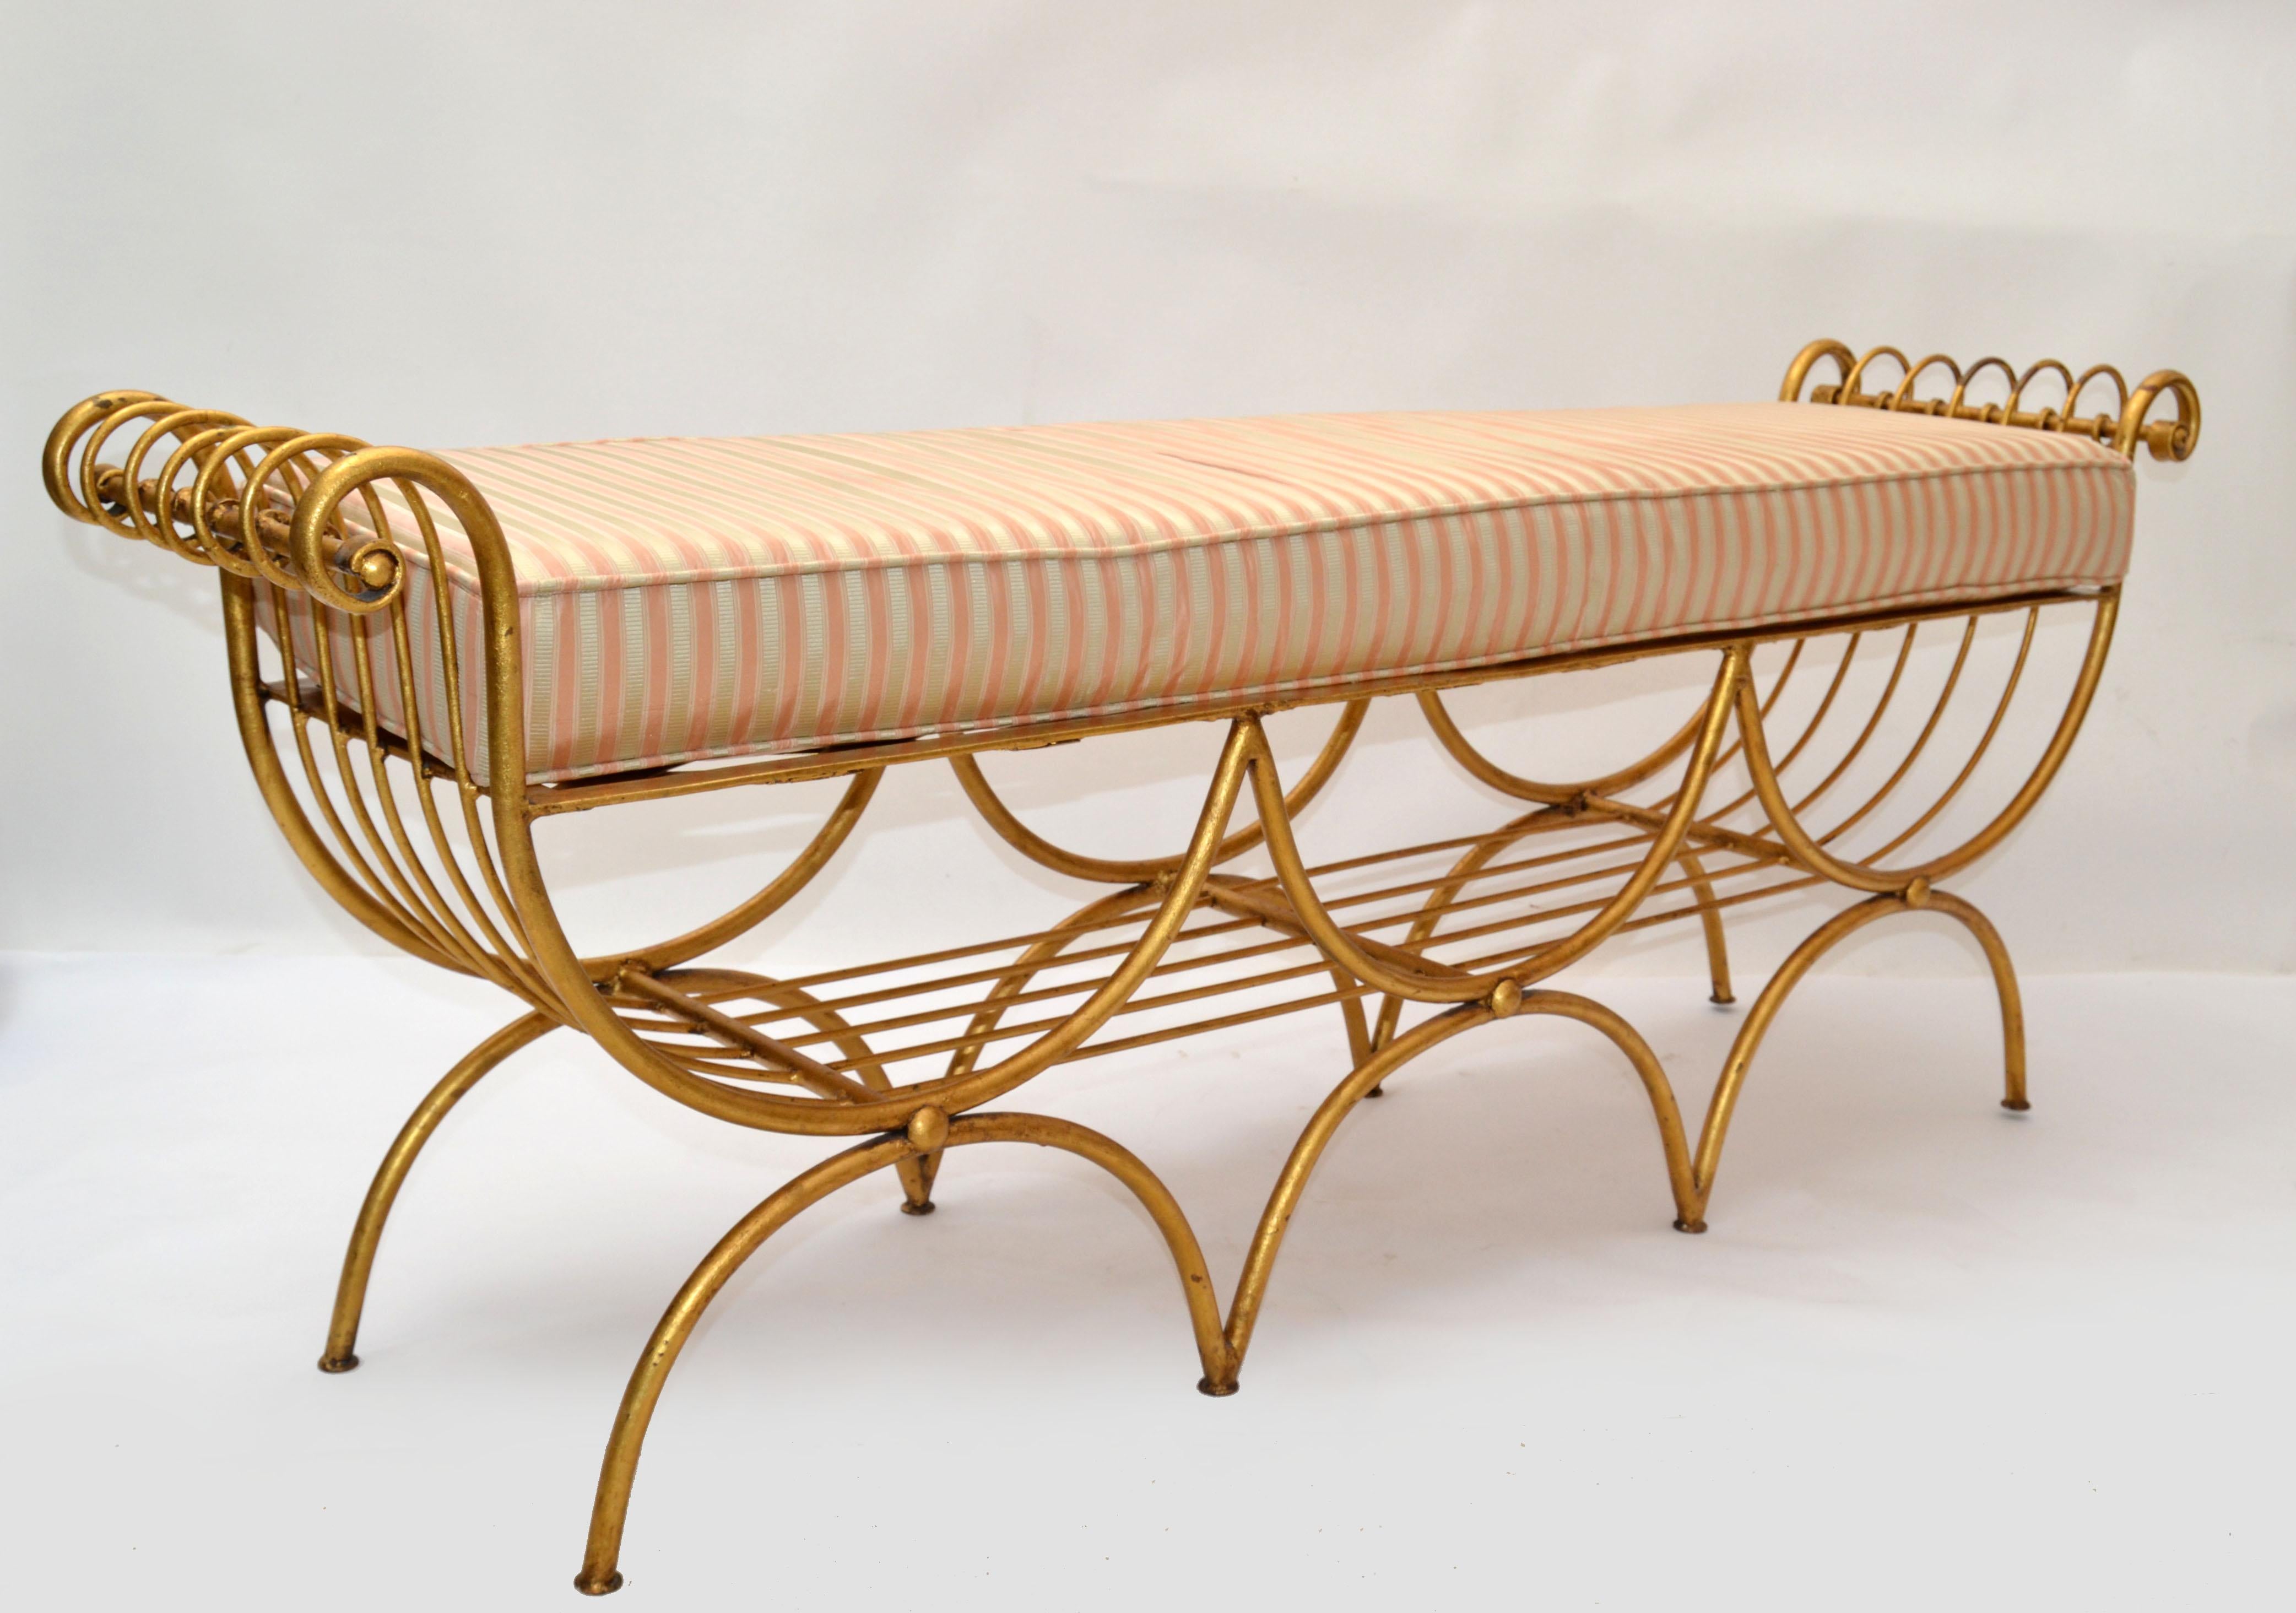 Beautiful Hollywood Regency gilt wrought iron and steel curule 3-seater Long Bench made in the late 1950, from Italy.
Semi circled tubular steel legs in gilt finish and cross woven seat area.
Comes with the original silk fabric seat cushion and is